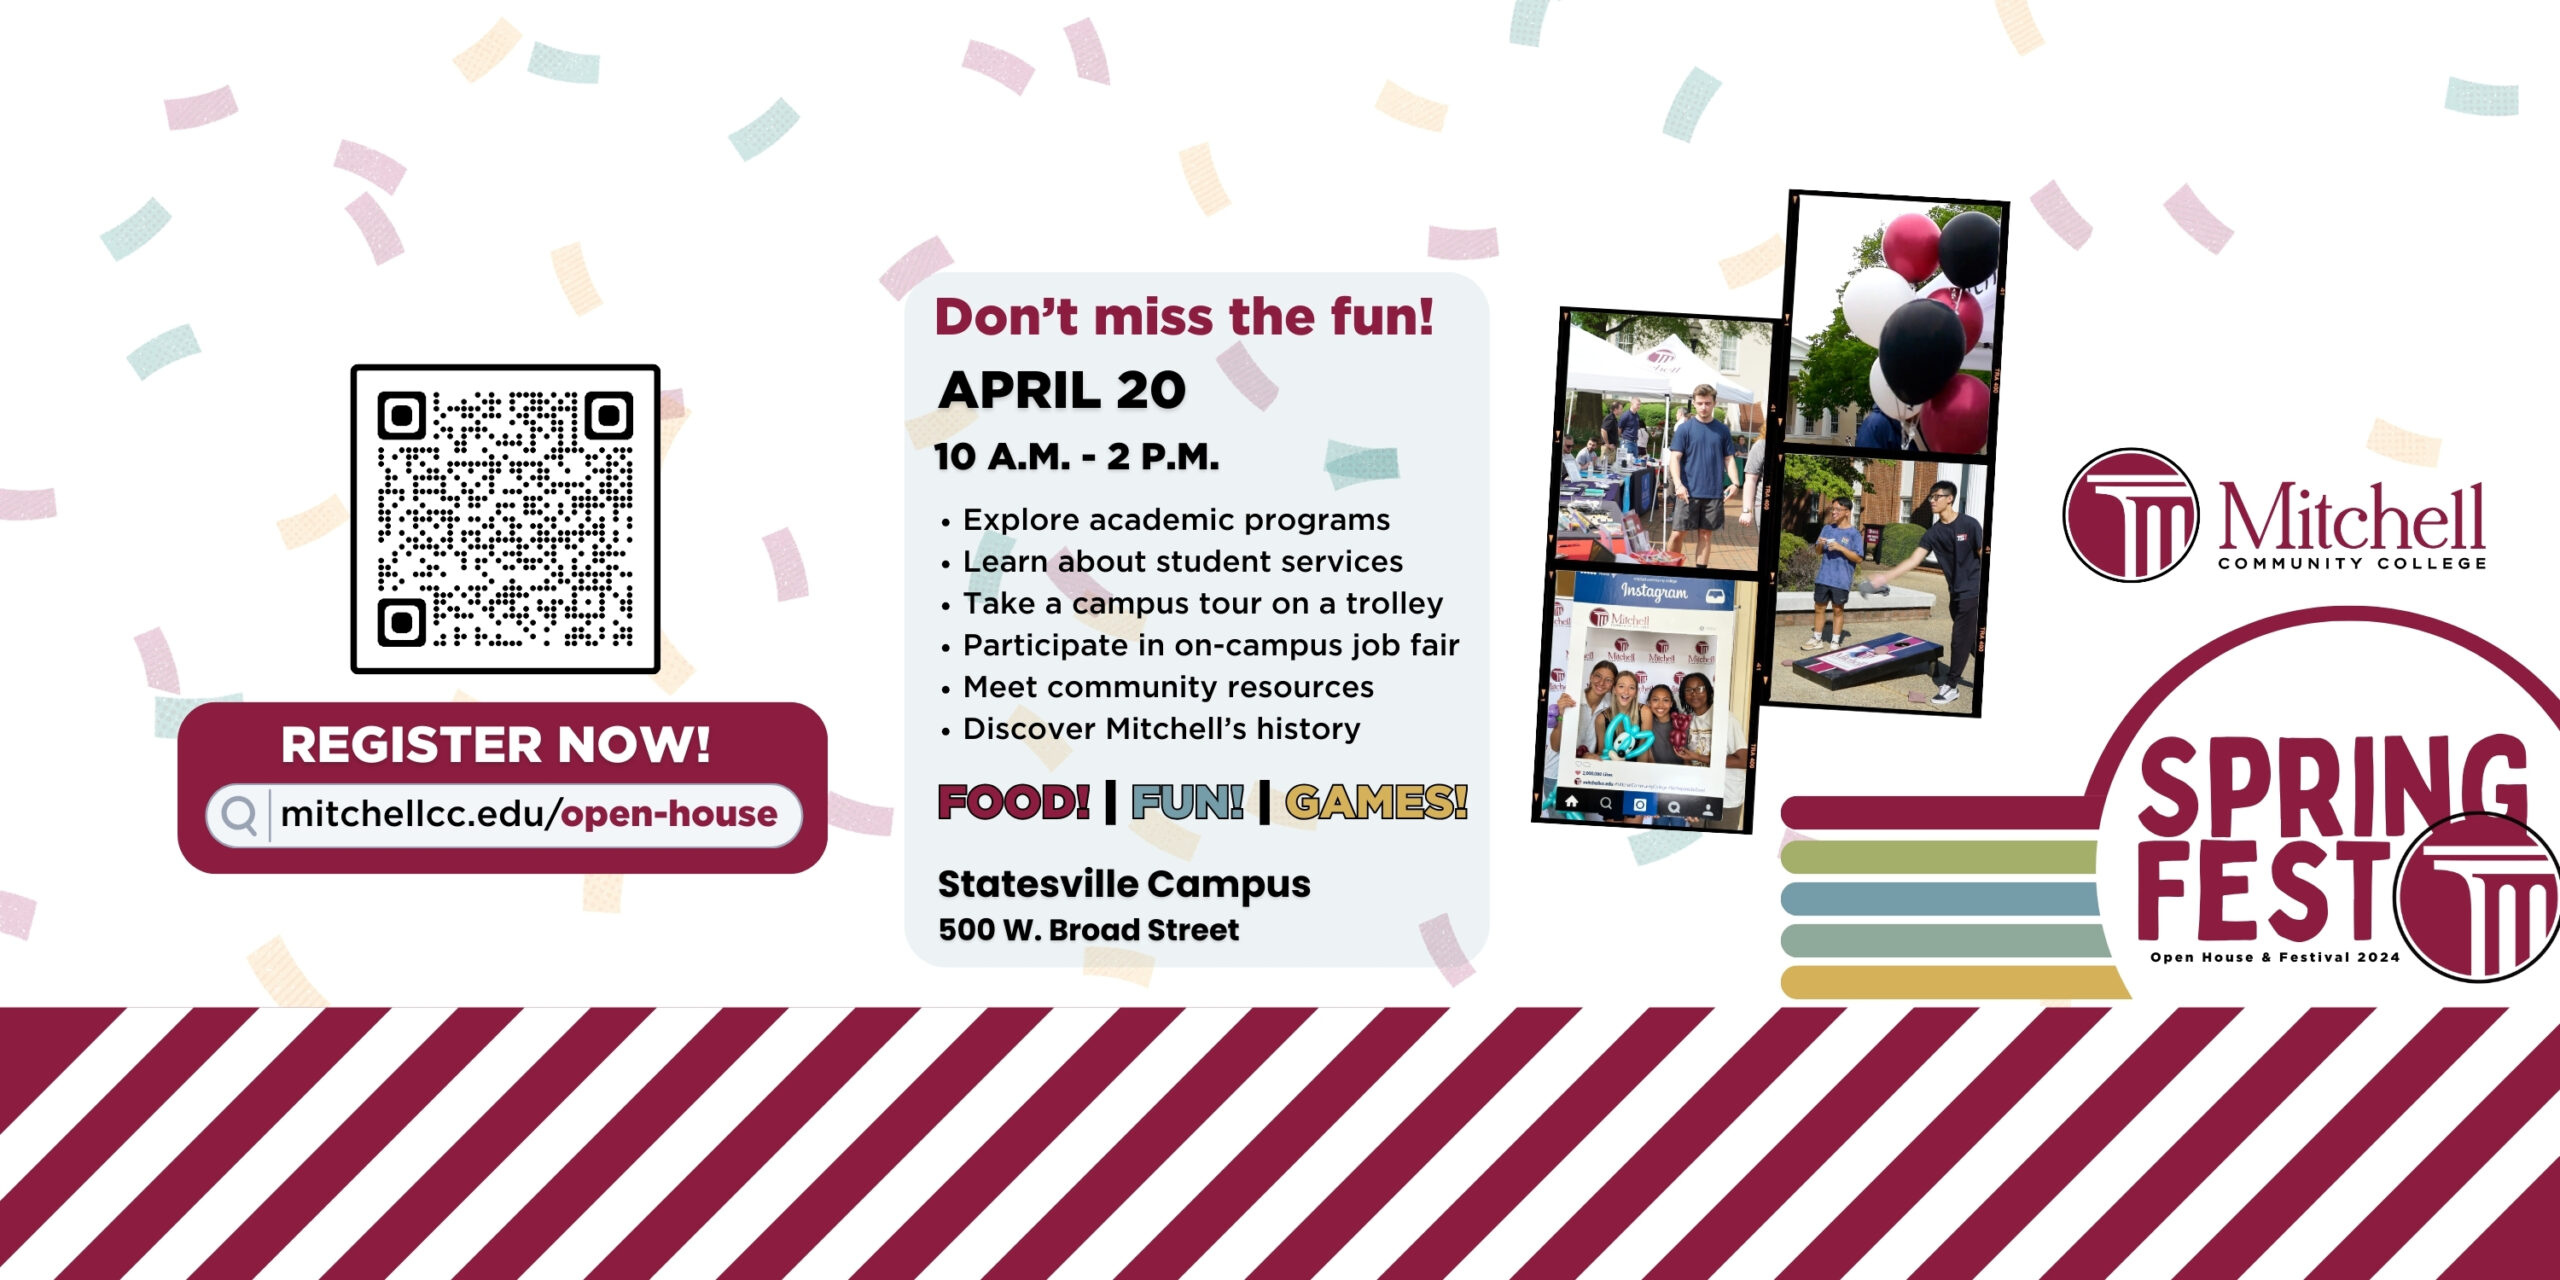 Graphic that reads "Don't miss the fun! - April 20 | 10 a.m. - 2 p.m. | Explore academic programs, learn about student services, take a campus tour, participate in on-campus job fair, meet community resources, discover Mitchell's history | Food! - Fun! - Games! | Statesville Campus, 500 W. Broad Street | Spring Fest - Open House & Festival 2024". Scan the QR code on the left side of the banner or click the banner for more info.